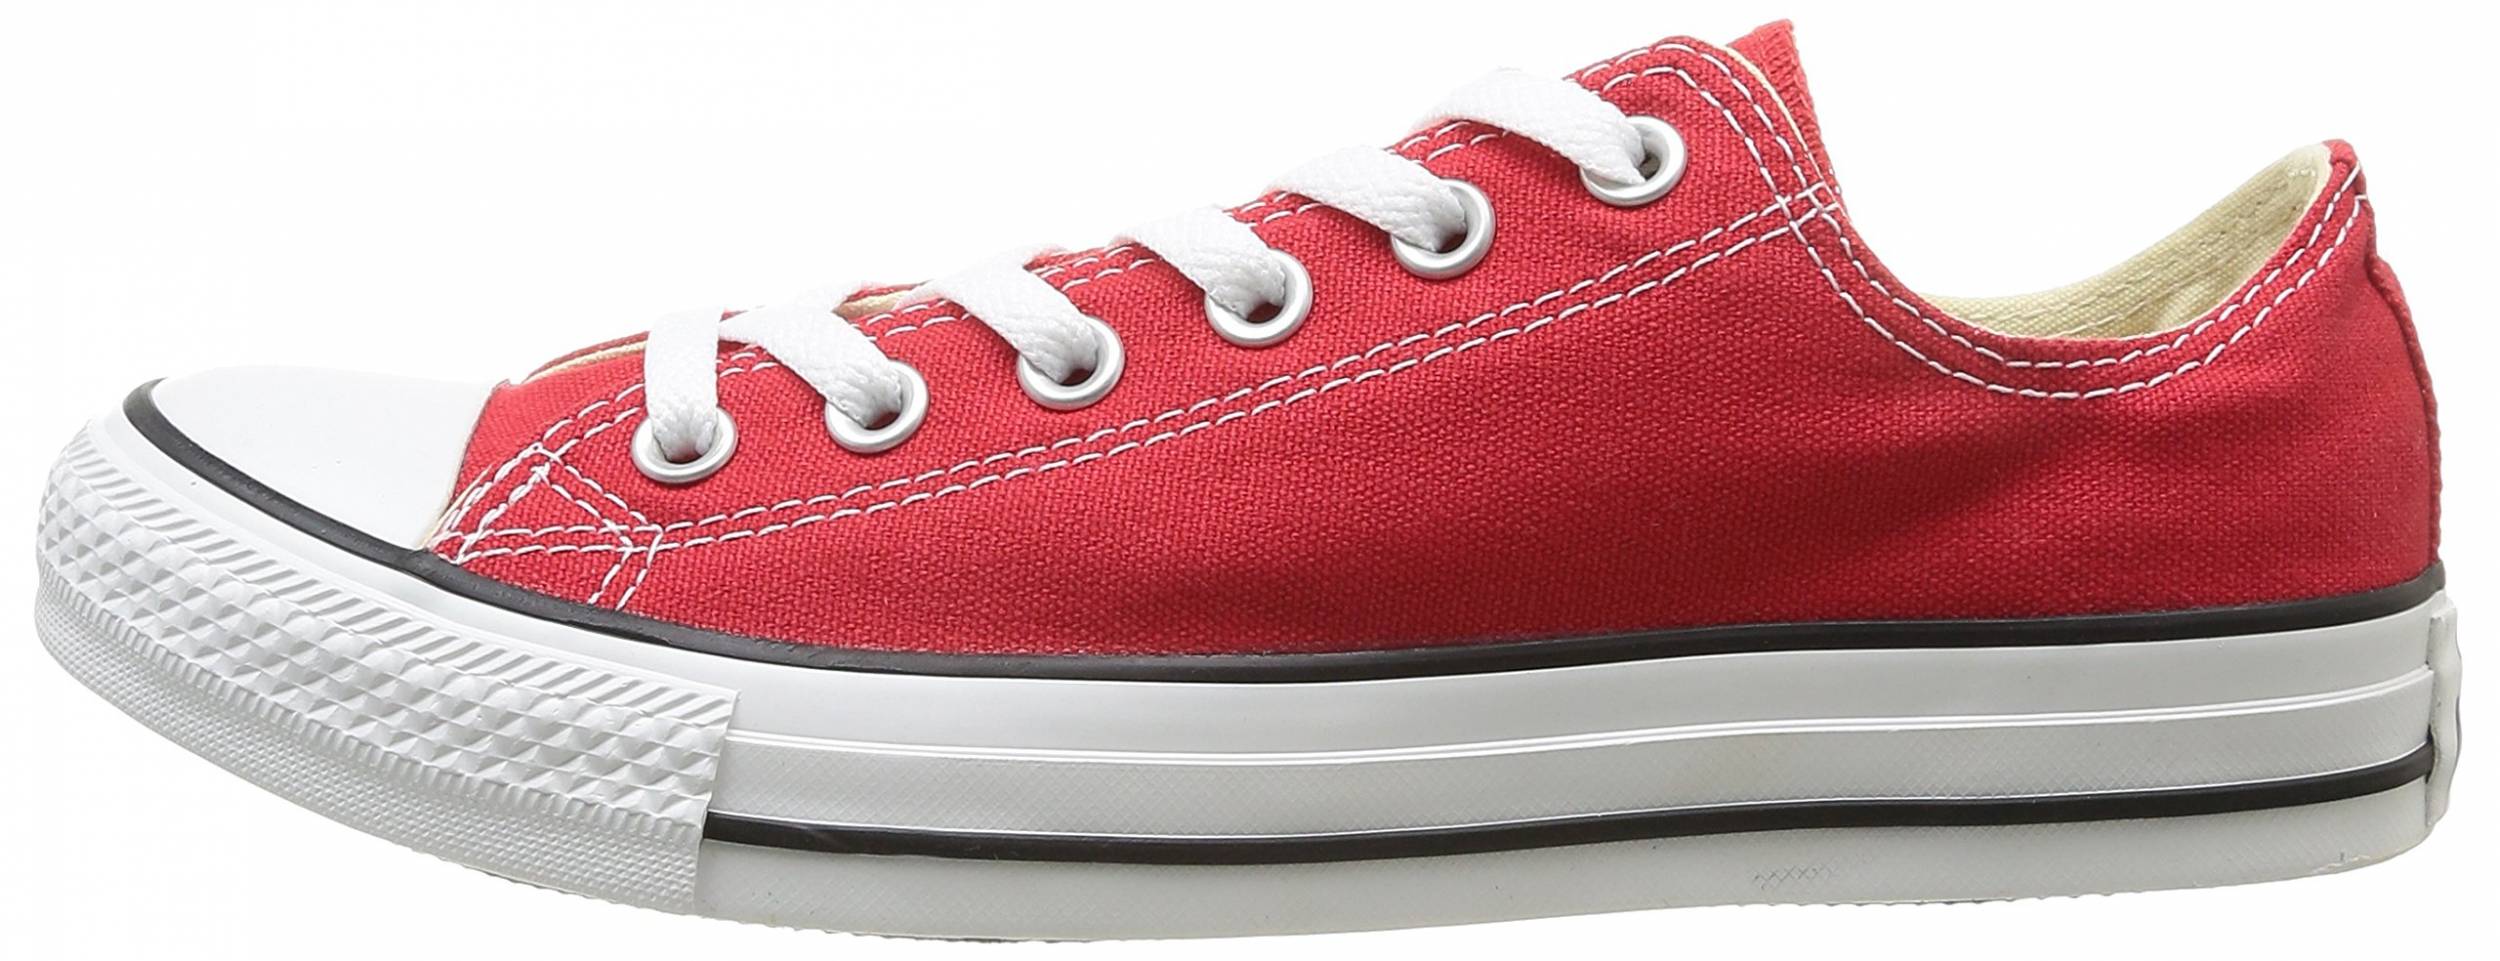 Only £25 + Review of Converse Chuck Taylor All Star Seasonal Ox | RunRepeat